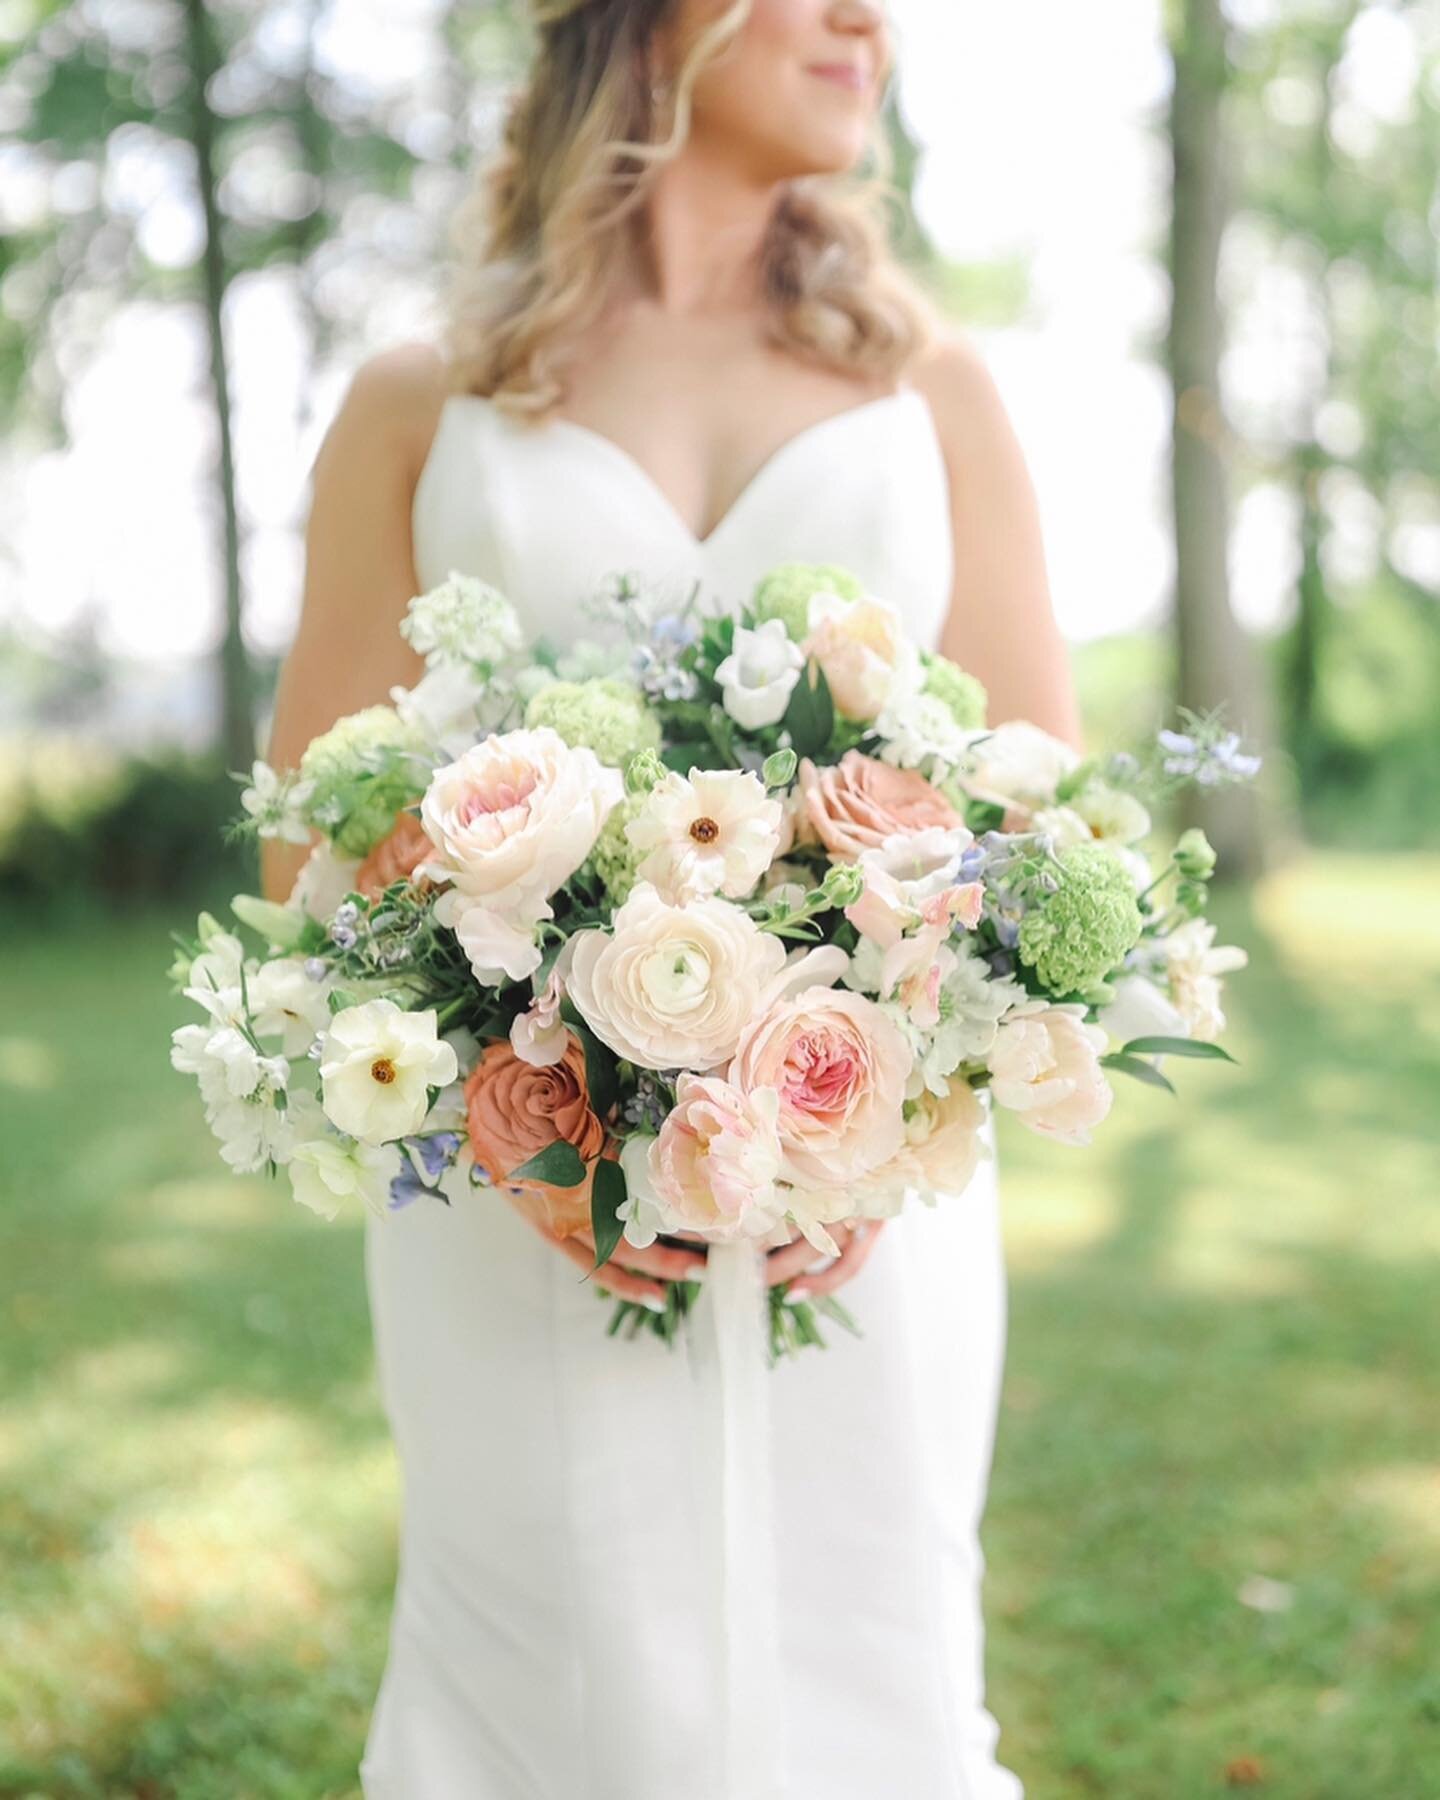 This bouquet was too good not to remember! A keepsake every bride is guaranteed when booking with Of the Valley.

2024 brides I want to hear from you! Go to Ofthevalleyfloralco.com to inquire today and let&rsquo;s create something that reflects you a